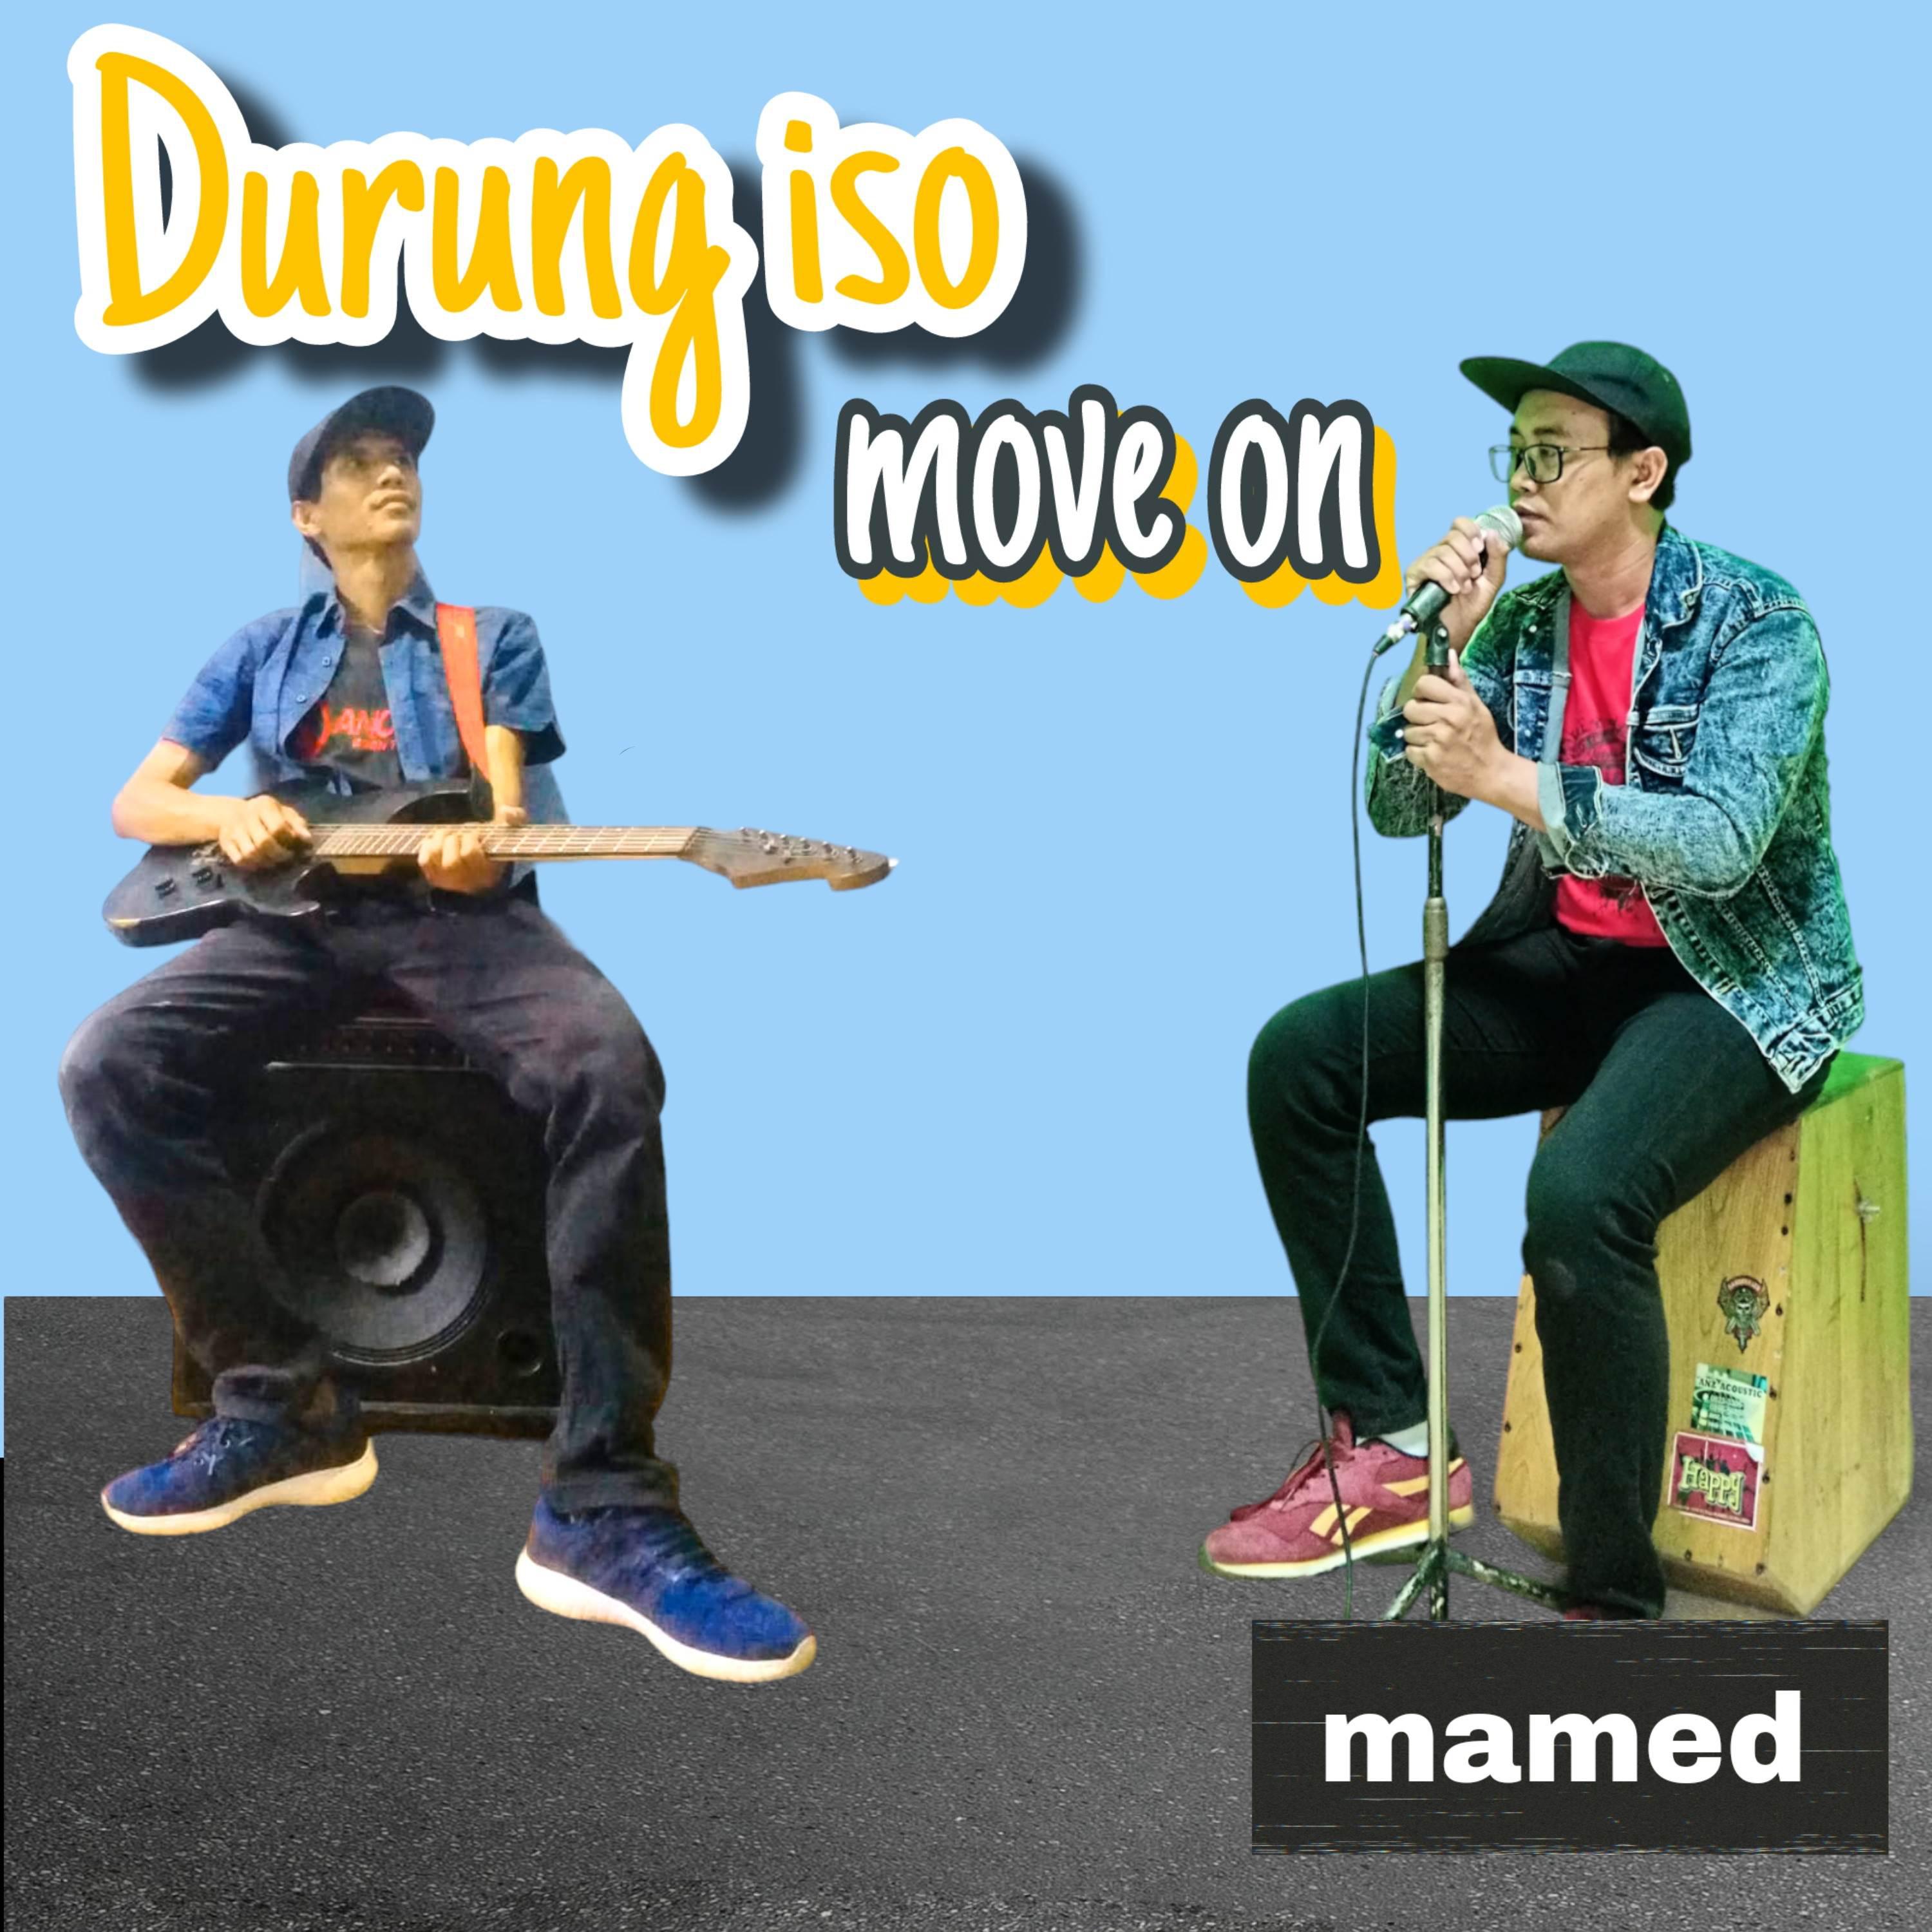 Постер альбома Durung iso move on